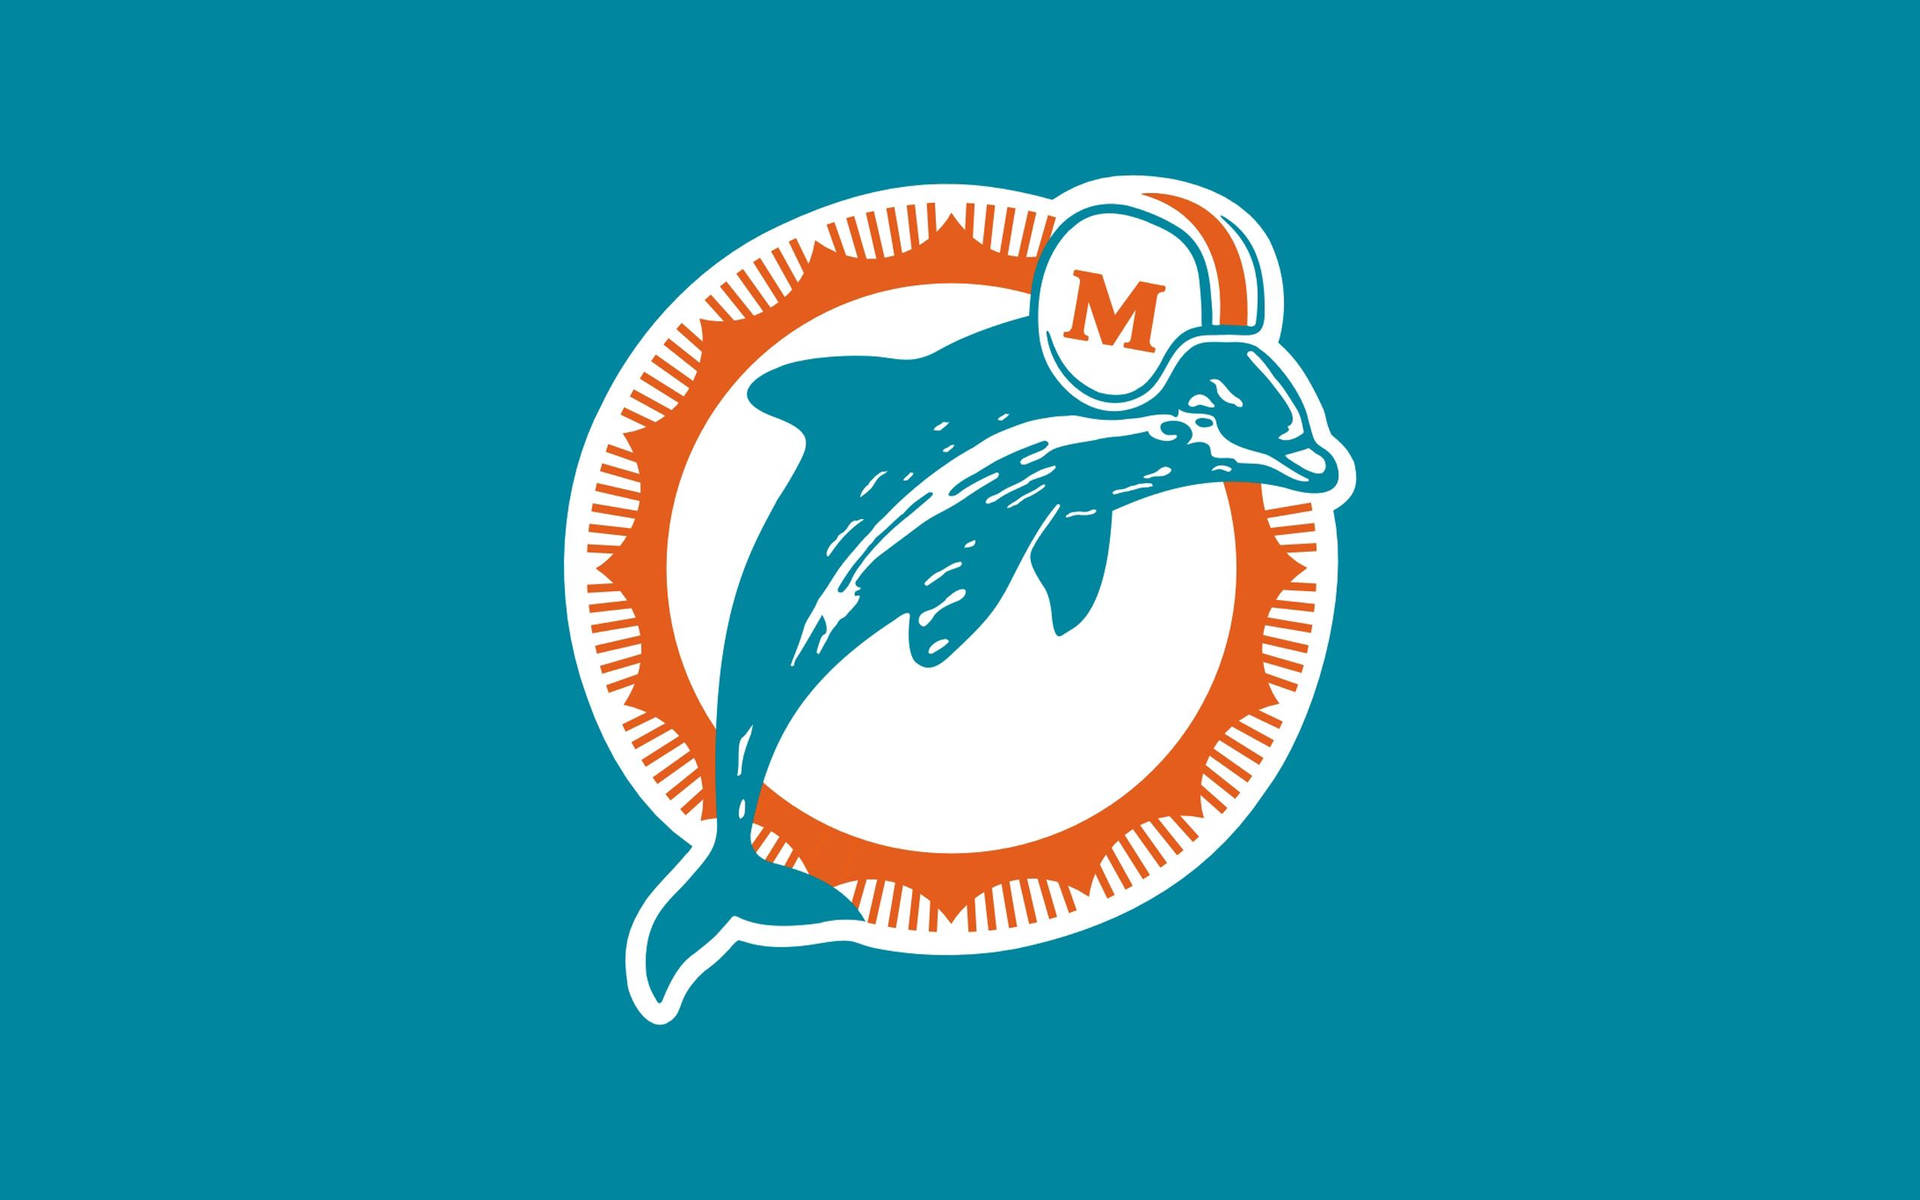 2560X1600 Dolphin Wallpaper and Background